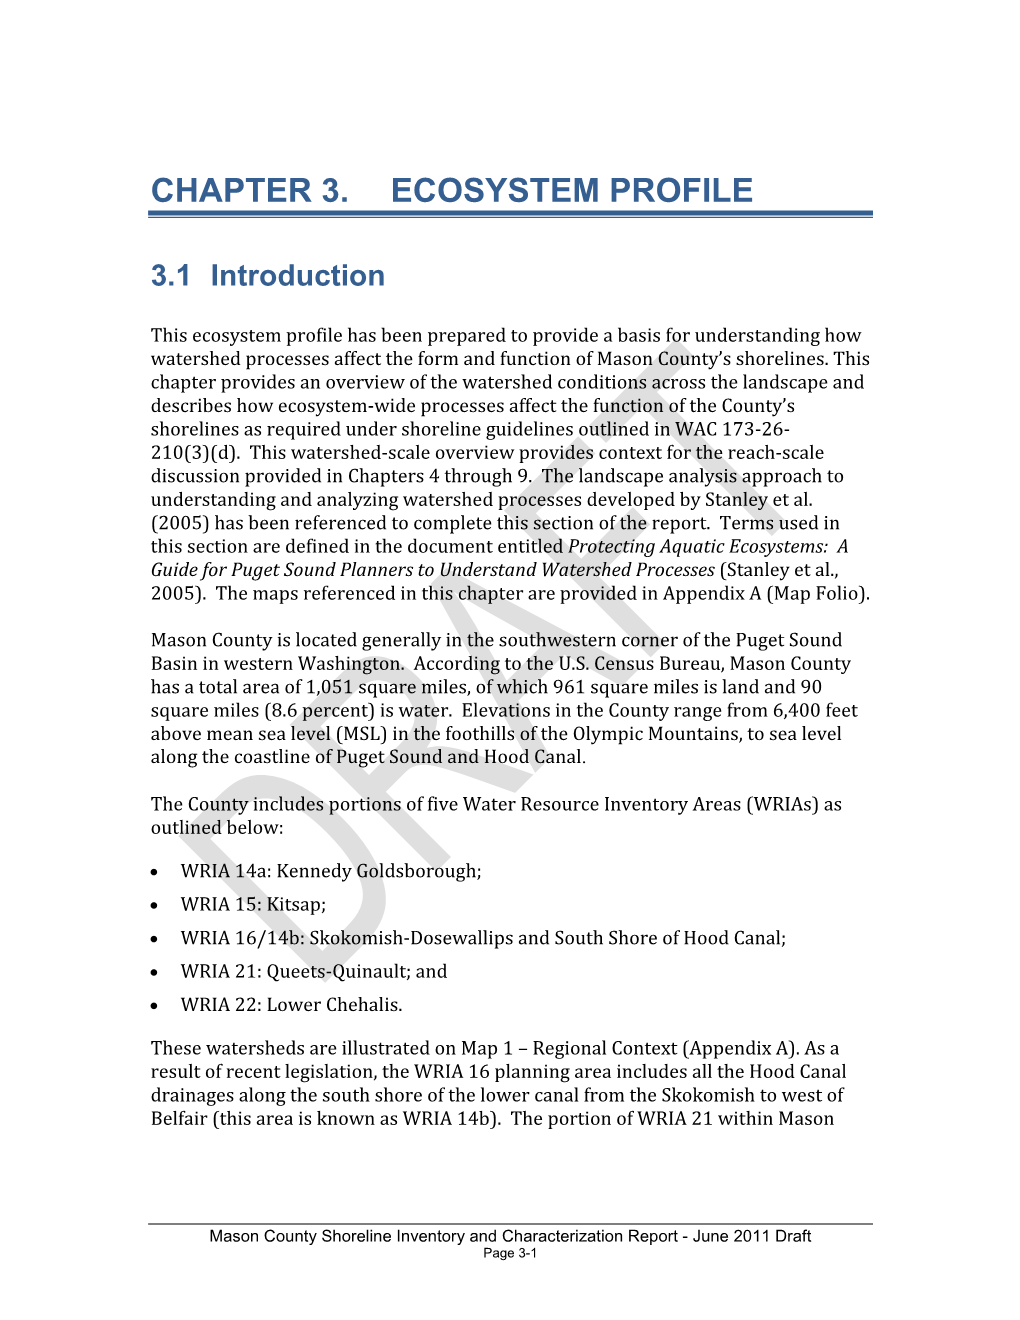 Chapter 3. Ecosystem Profile